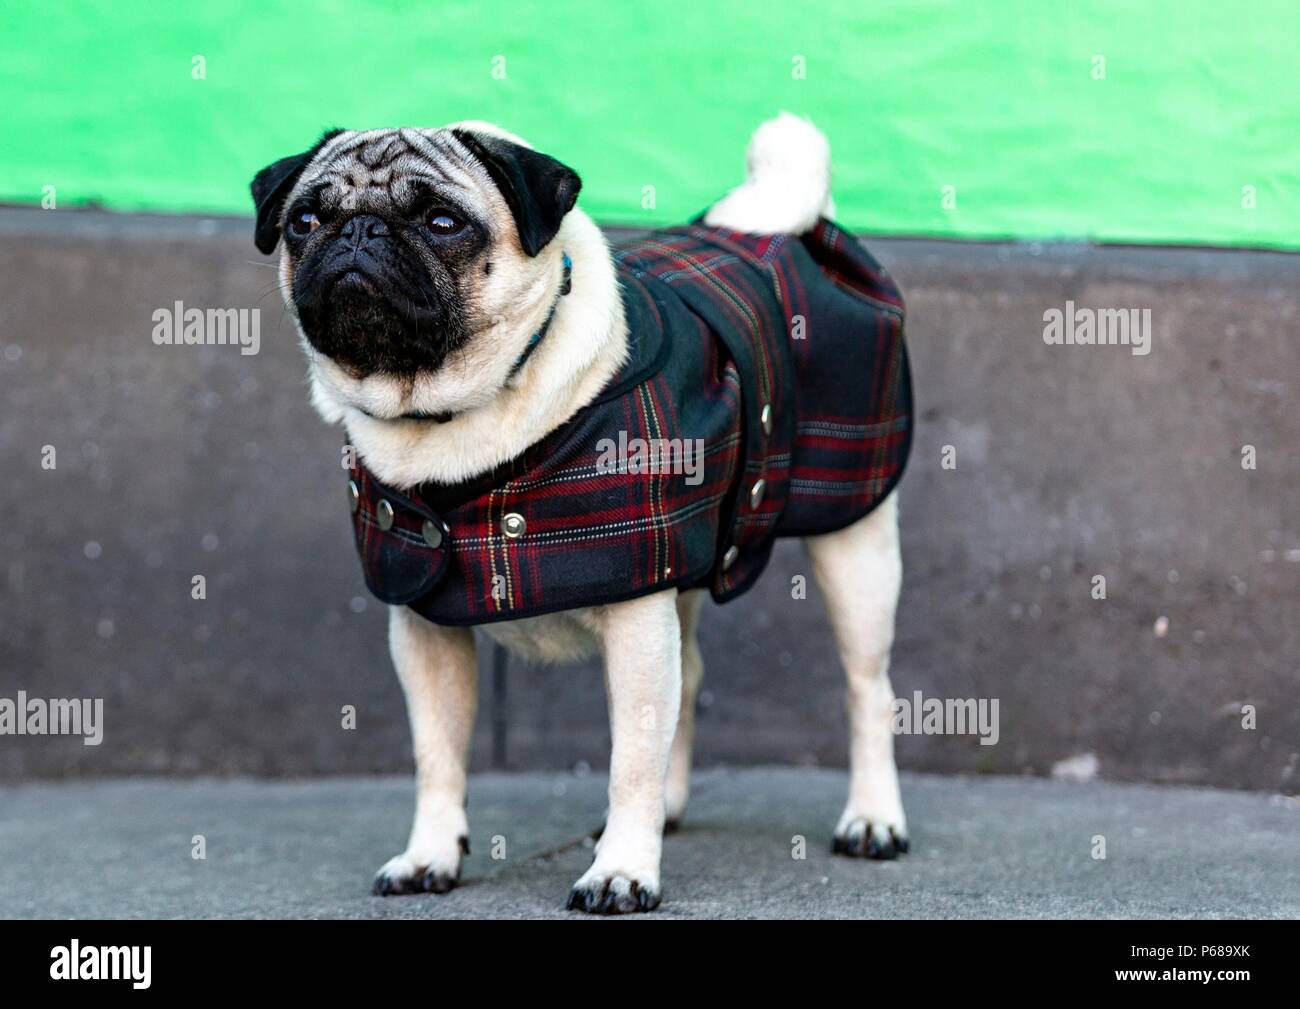 Edinburgh, Scotland, UK. 28th June, 2018. Cast and crew attend a special screening of Patrick at the Edinburgh International Film Festival.  Directed by Maddie Fletcher it stars Beattie Edmondson  Pictured: Harley the dog Credit: Rich Dyson/Alamy Live News Stock Photo